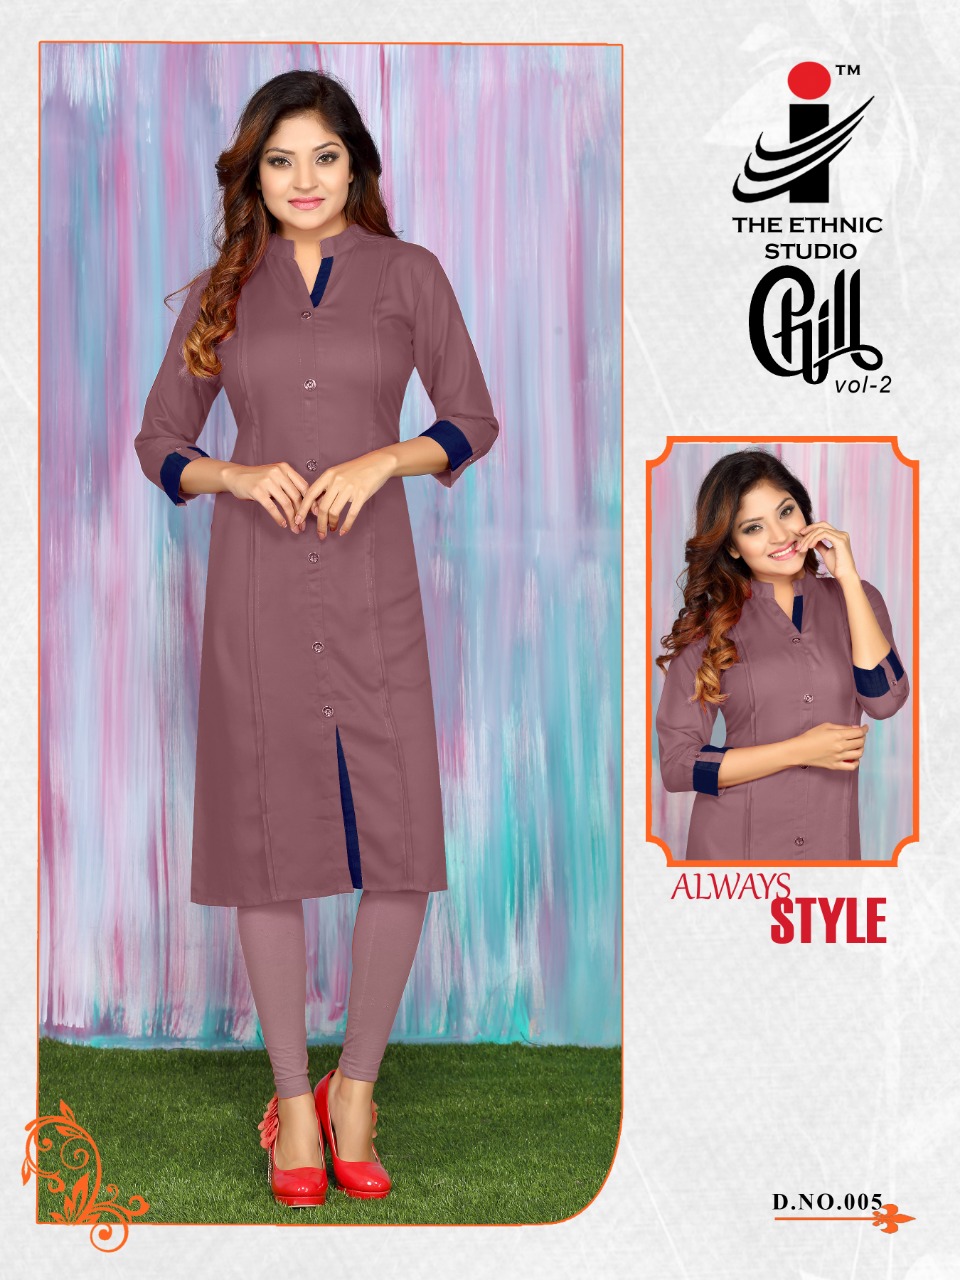 The ethnic studio chill vol 2 rayon ready to wear kurties exporter